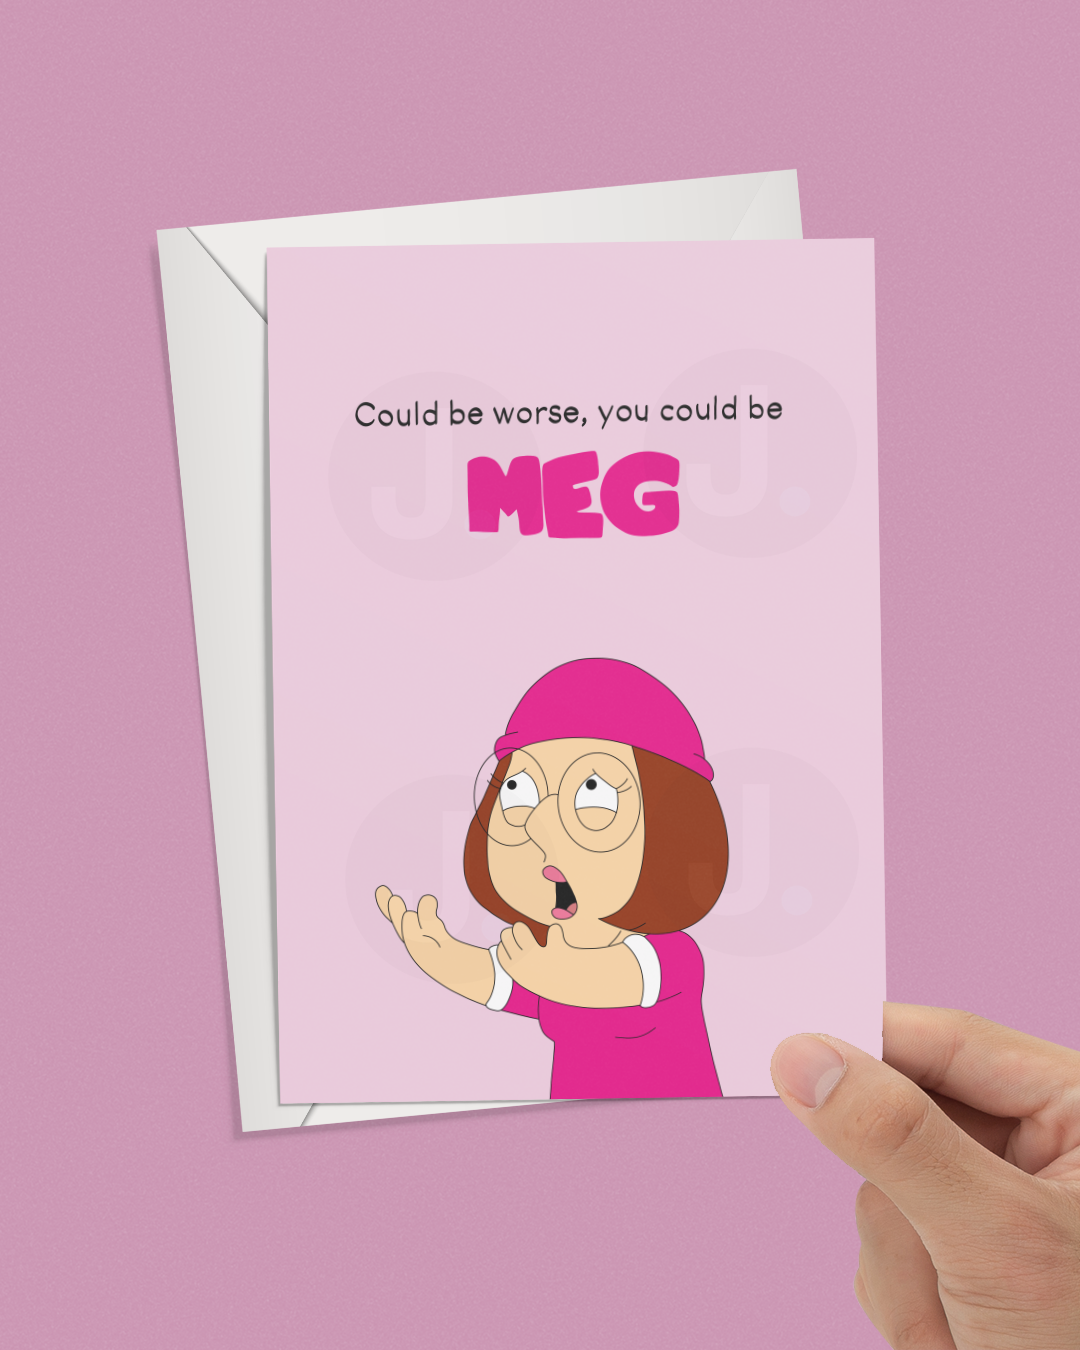 Family Guy Inspired Greetings Card - Could Be Worse, You Could Be Meg Card - Cartoon Family Guy Inspired Greetings Card